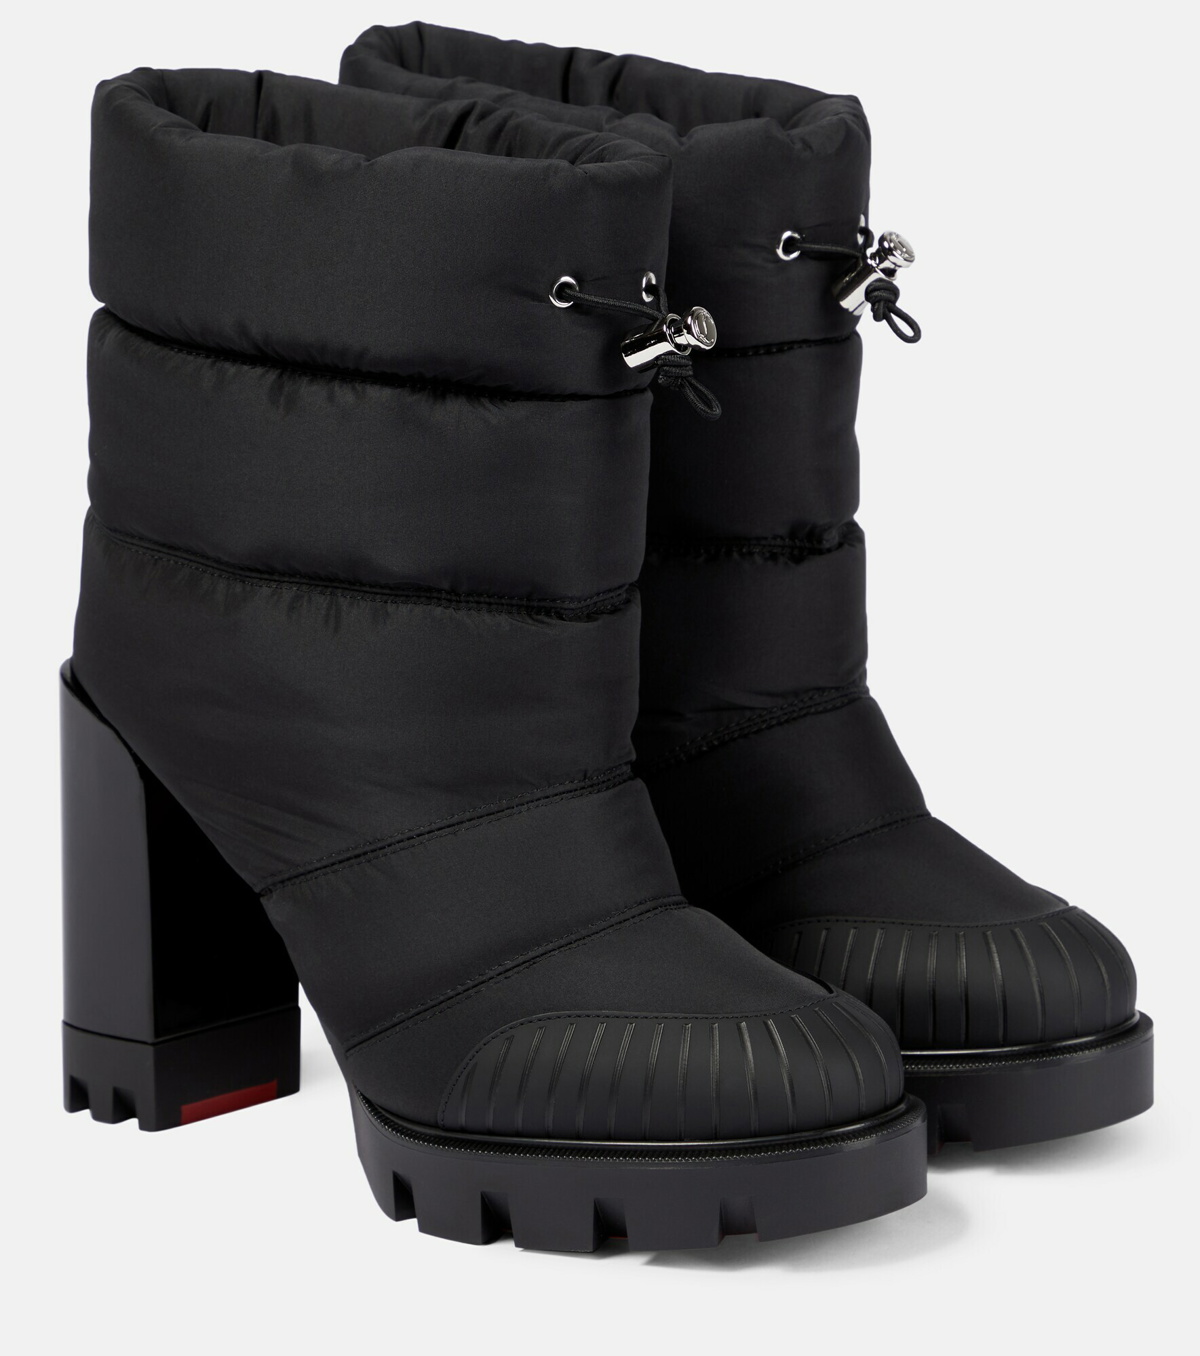 Christian Louboutin Chain-Midsole Red Sole Ankle Boot  Christian louboutin  boots, Christian louboutin shoes, Boots